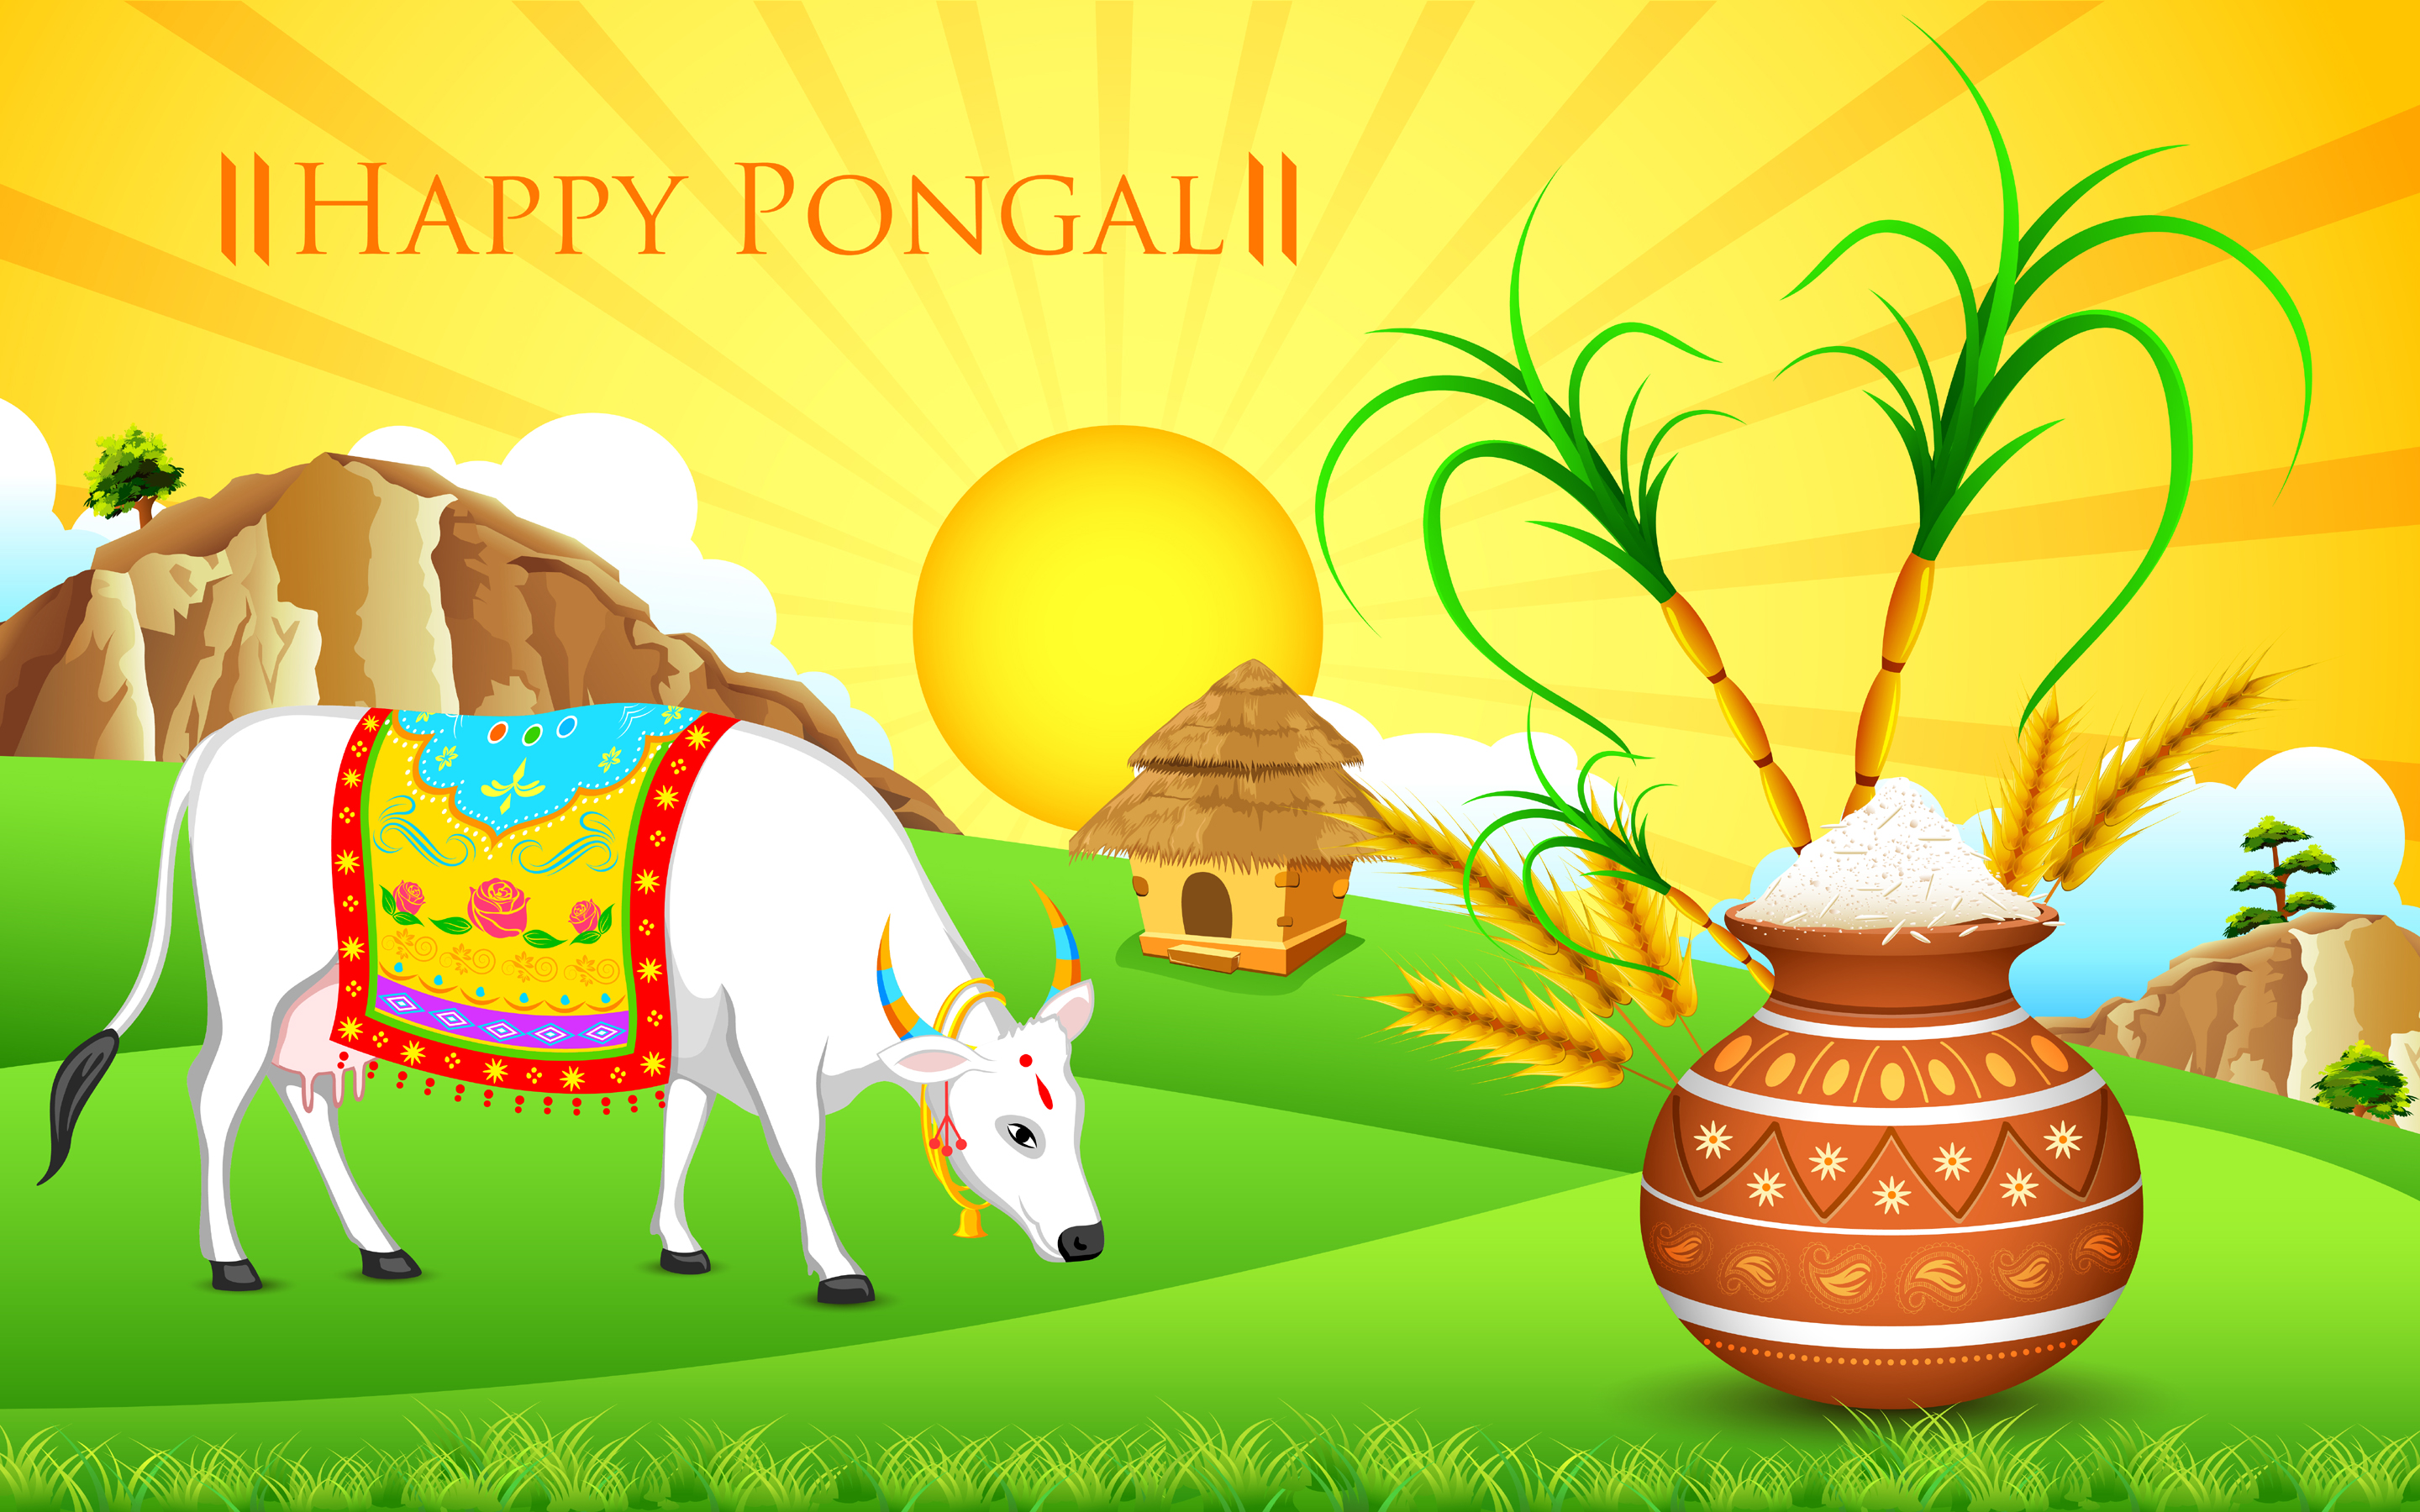 Happy Pongal hd 3d wallpapers (4)